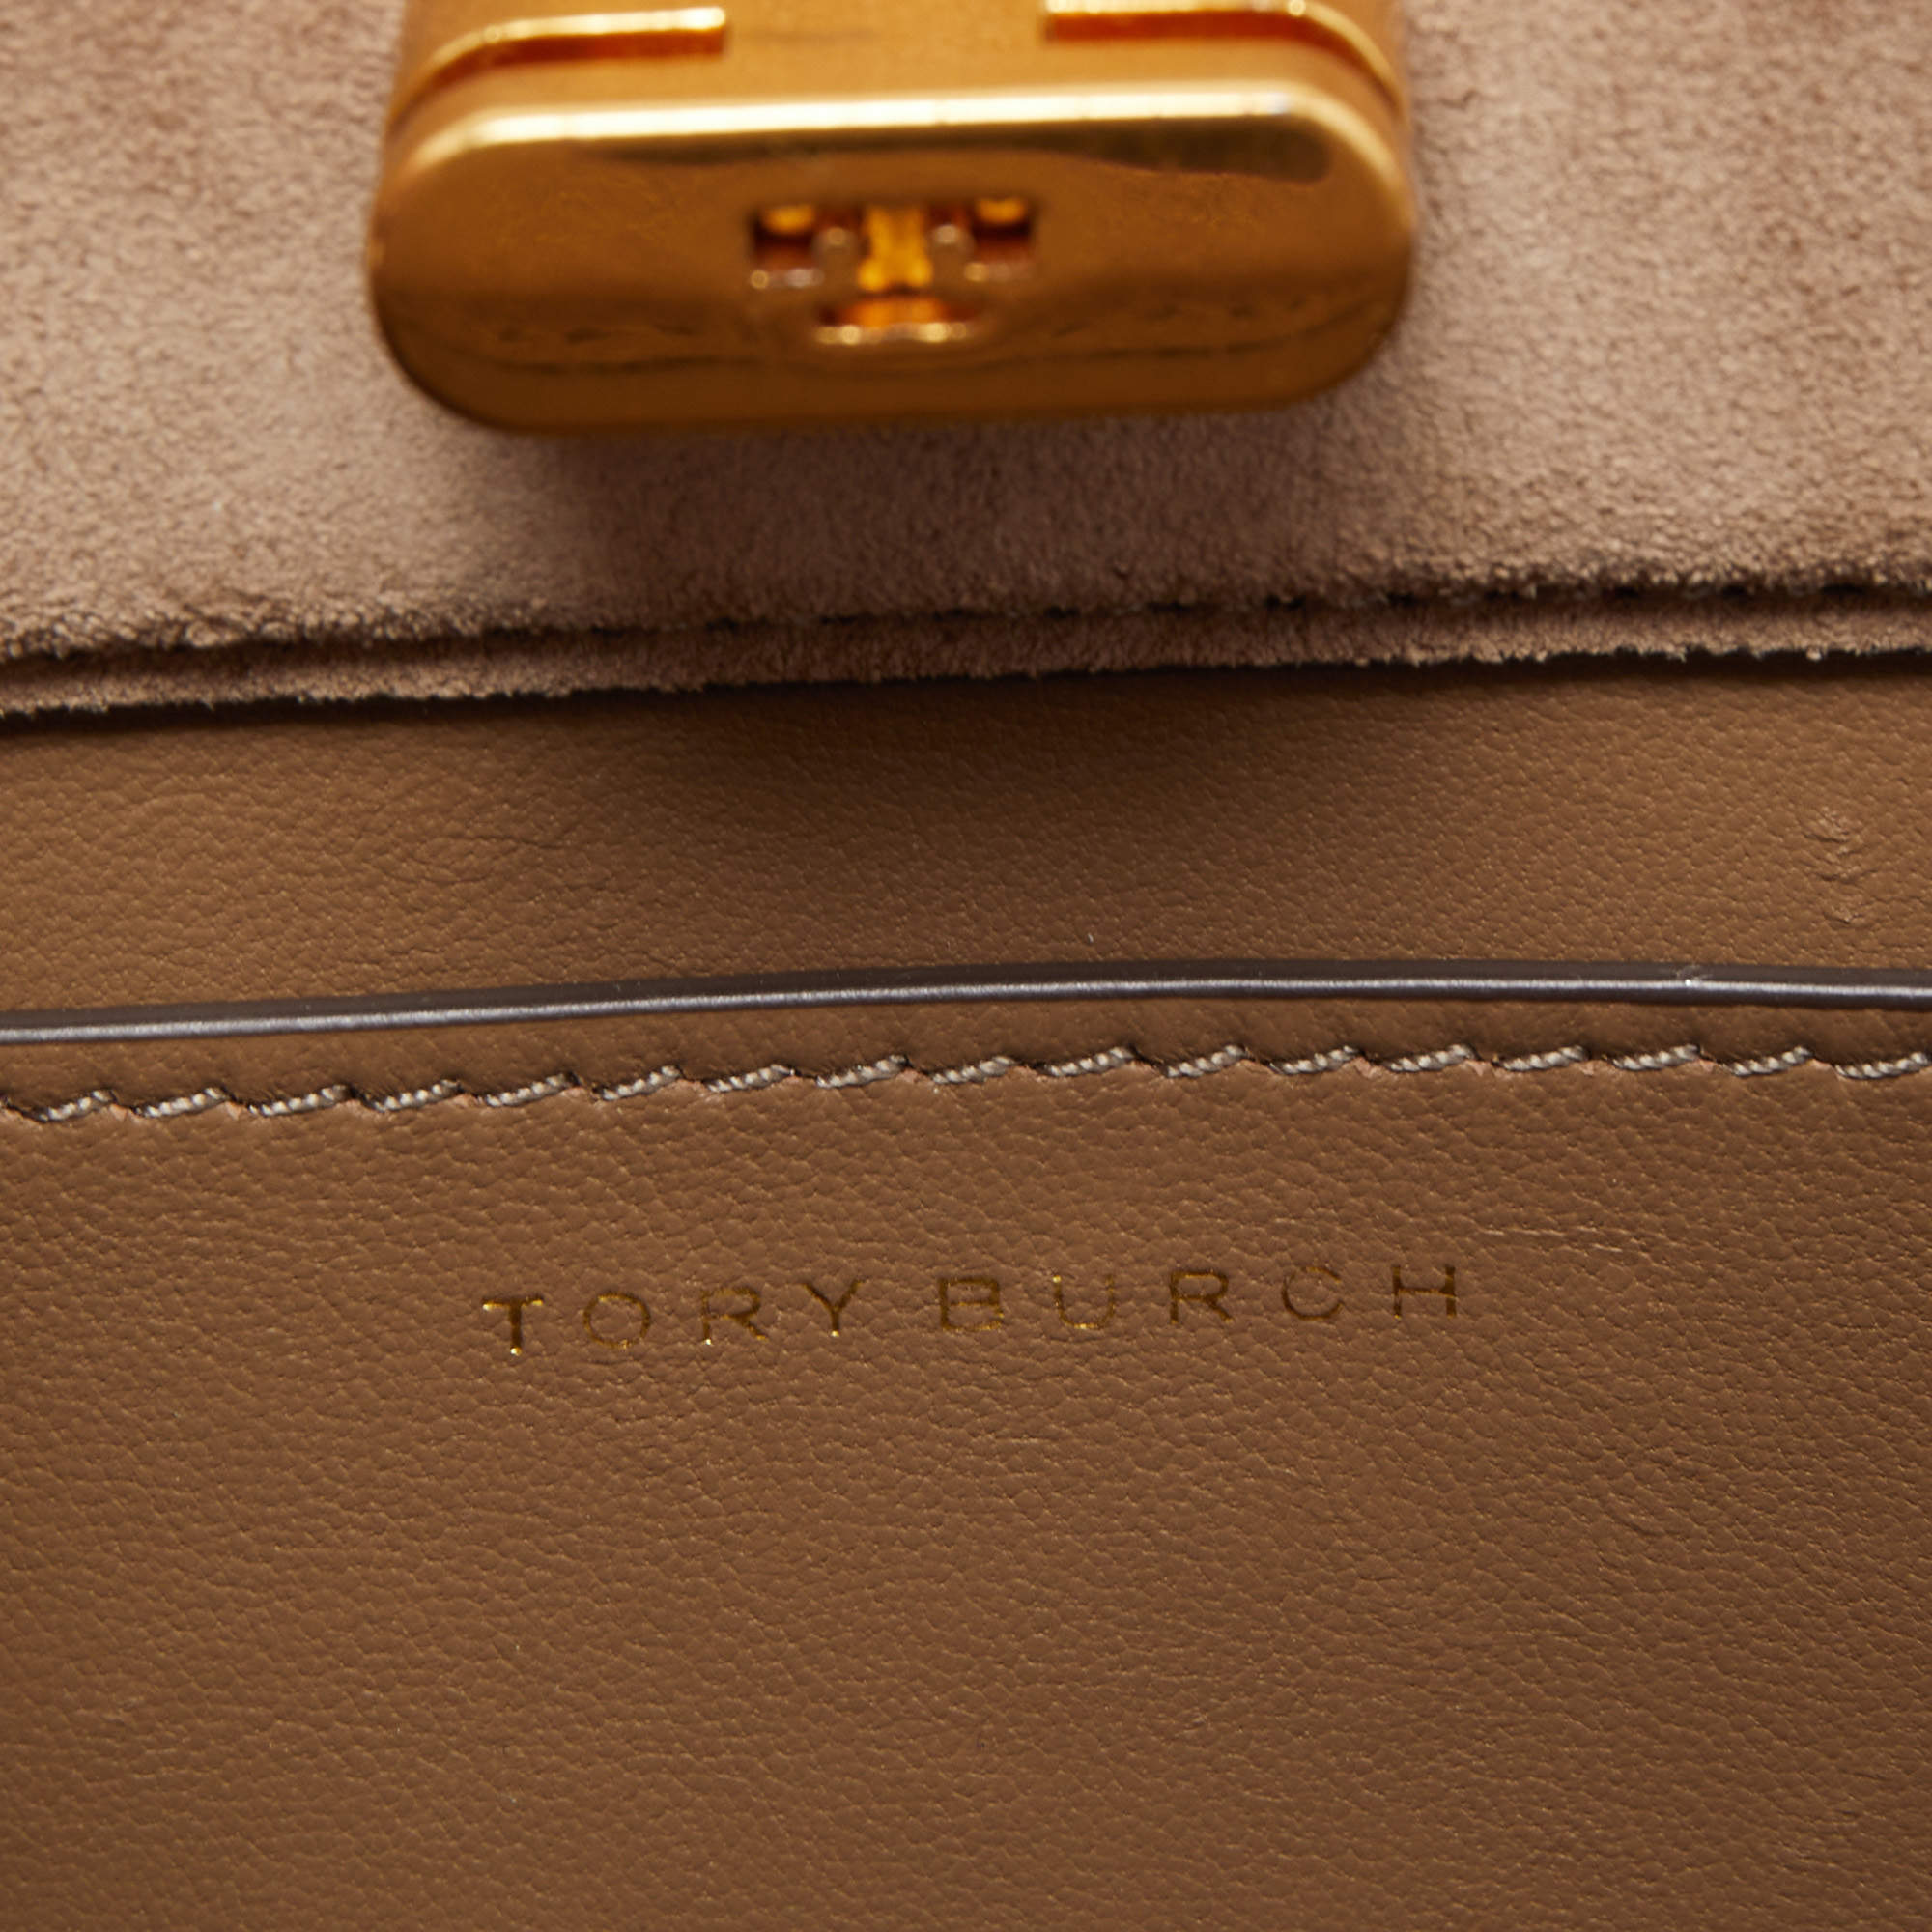 Tory Burch - The Lee Radziwill Bag Now in croc-embossed Italian leather and  suede #ToryBurchFW19 #ToryBurch #ToryBurchBags Shop now:  torybur.ch/leeradziwill